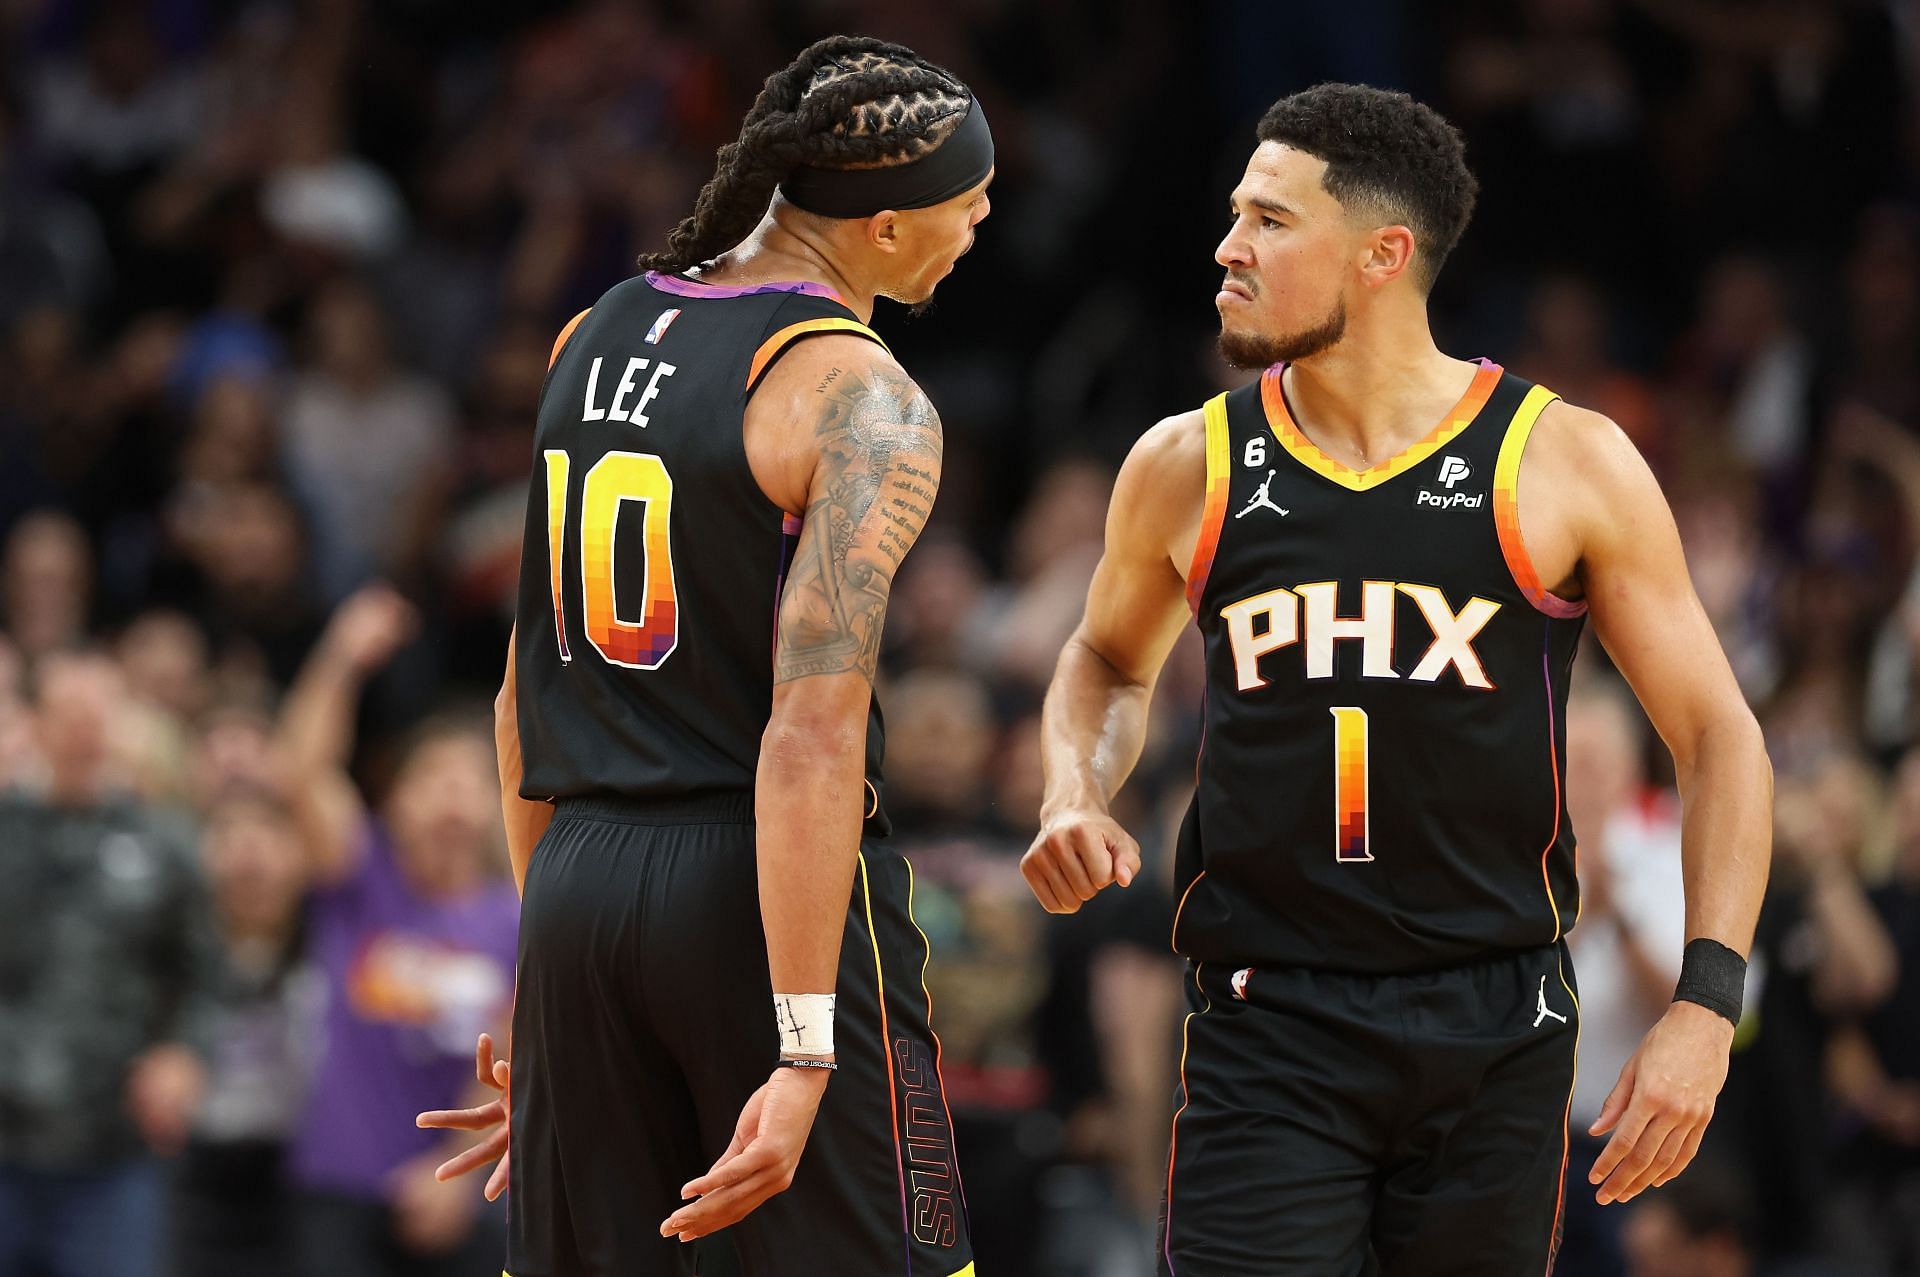 Phoenix Suns guards Damion Lee and Devin Booker